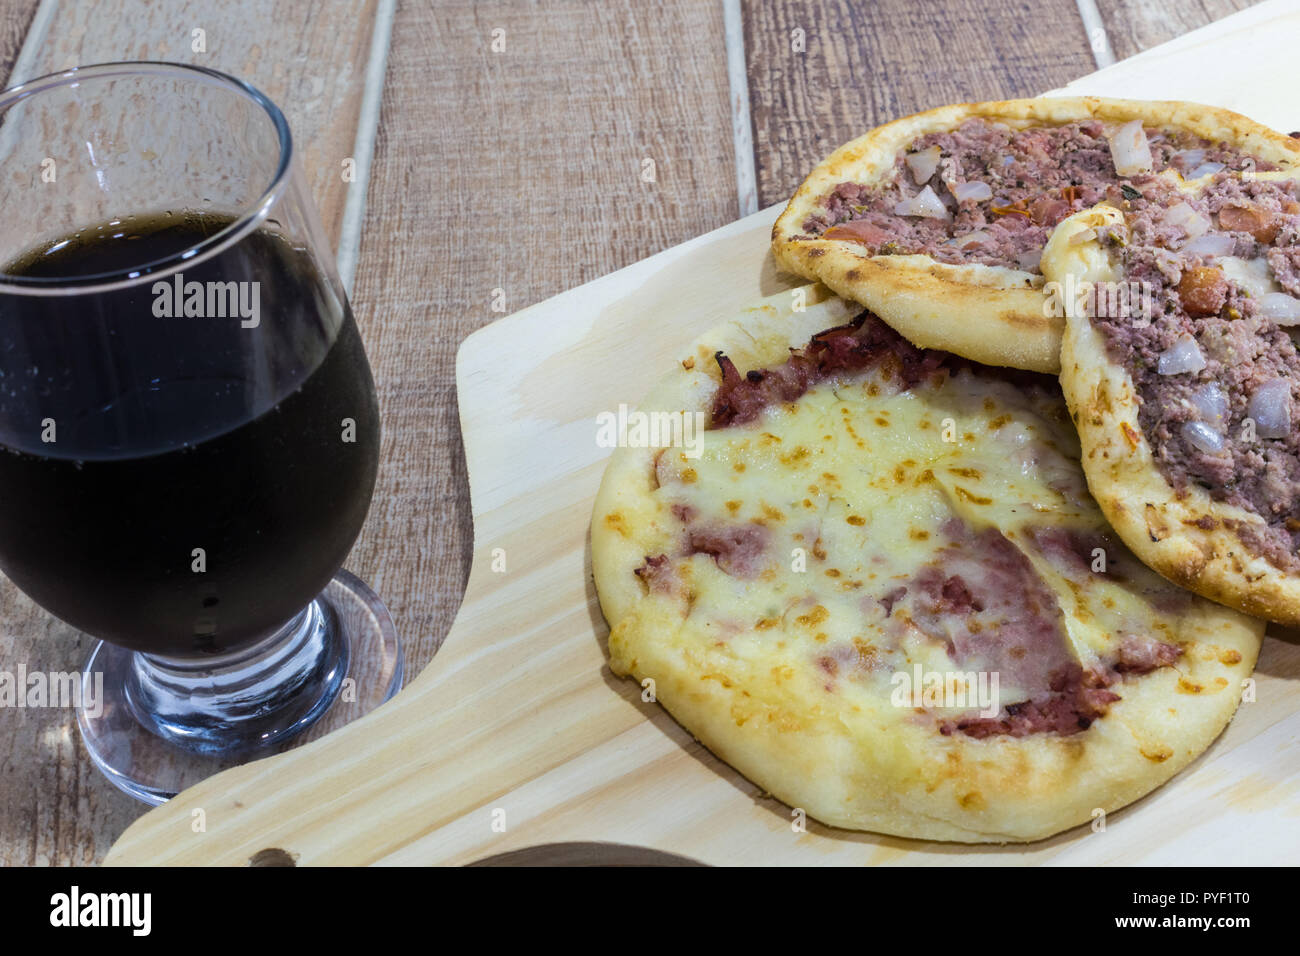 Delicious Arabic Esfiha, with fillings cheese and meat with tomato and onion. Served on a wooden board. Stock Photo